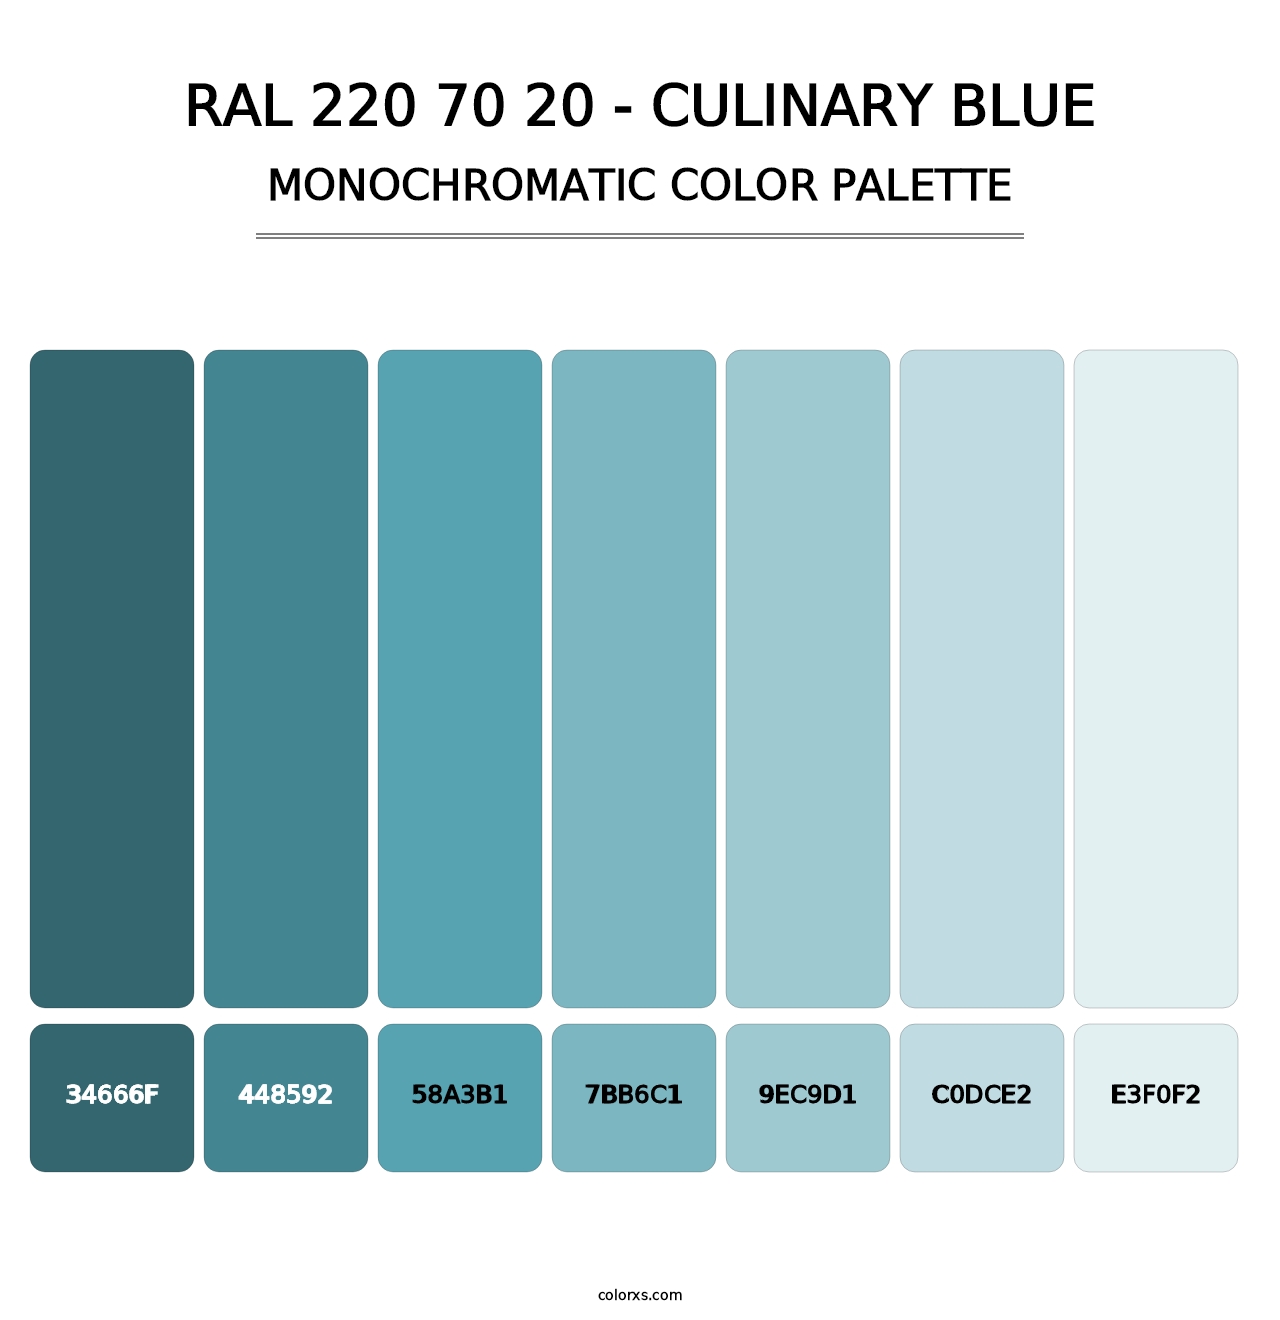 RAL 220 70 20 - Culinary Blue - Monochromatic Color Palette